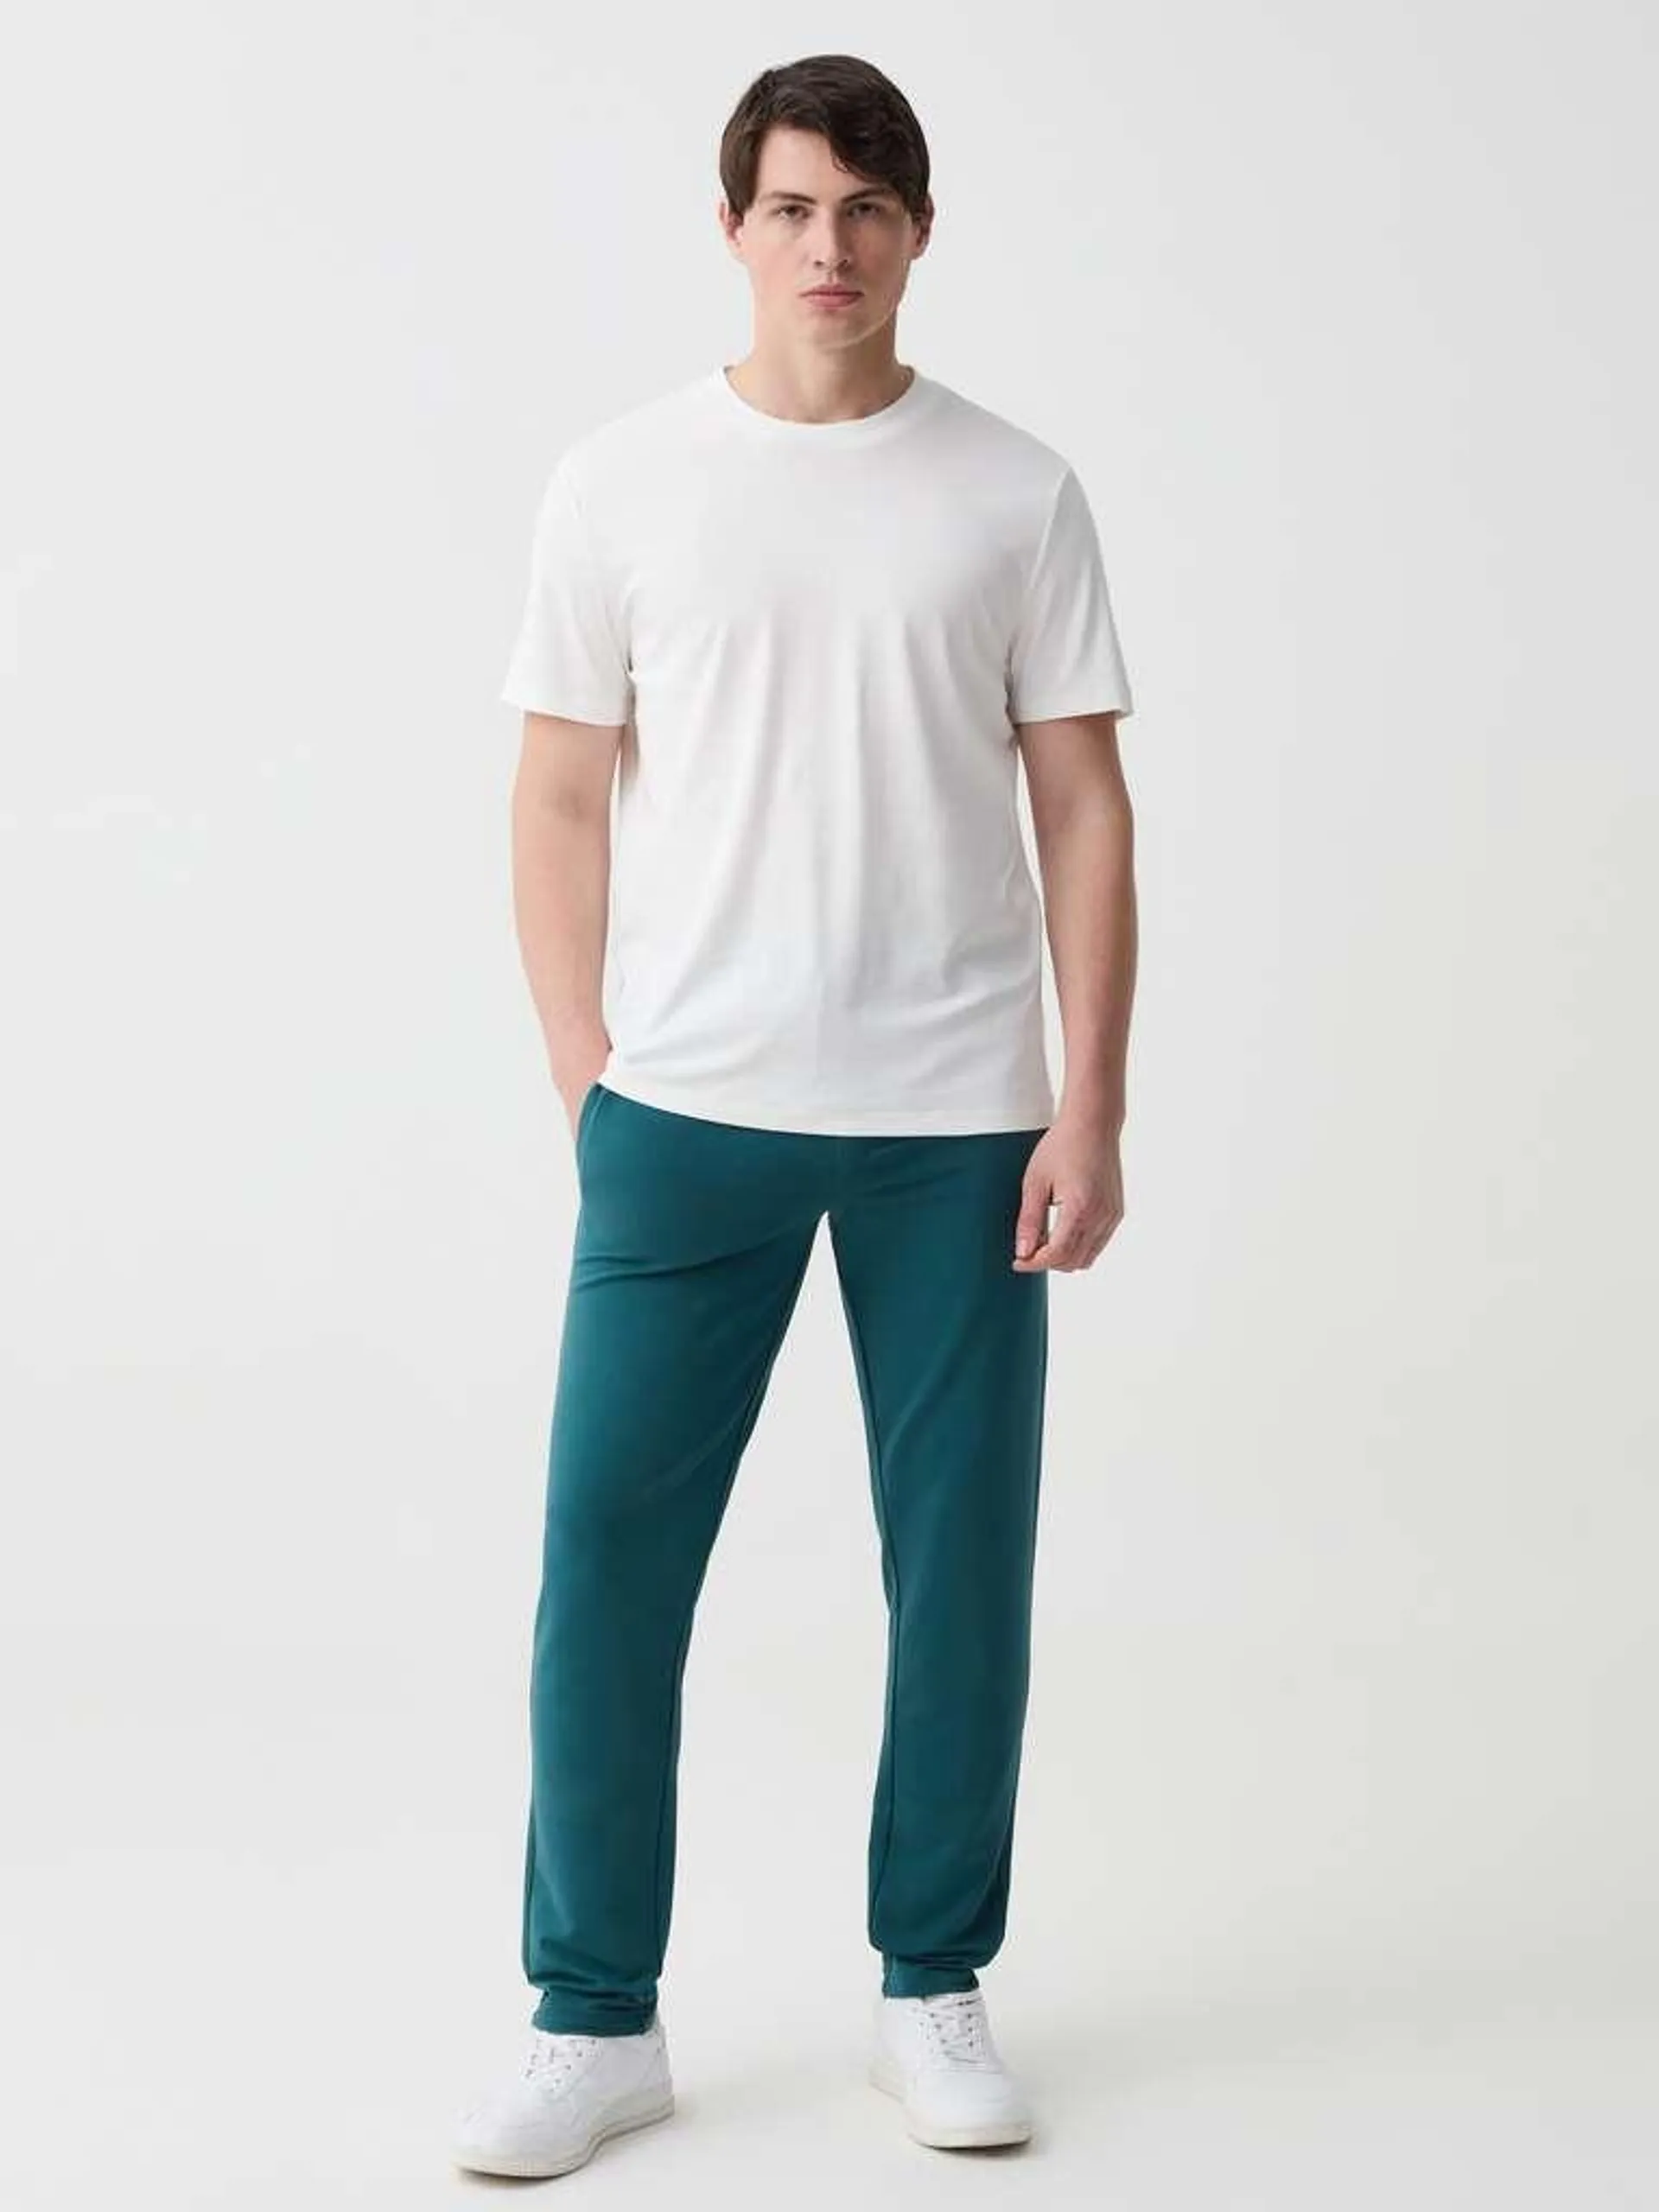 Teal Green Fleece joggers with drawstring